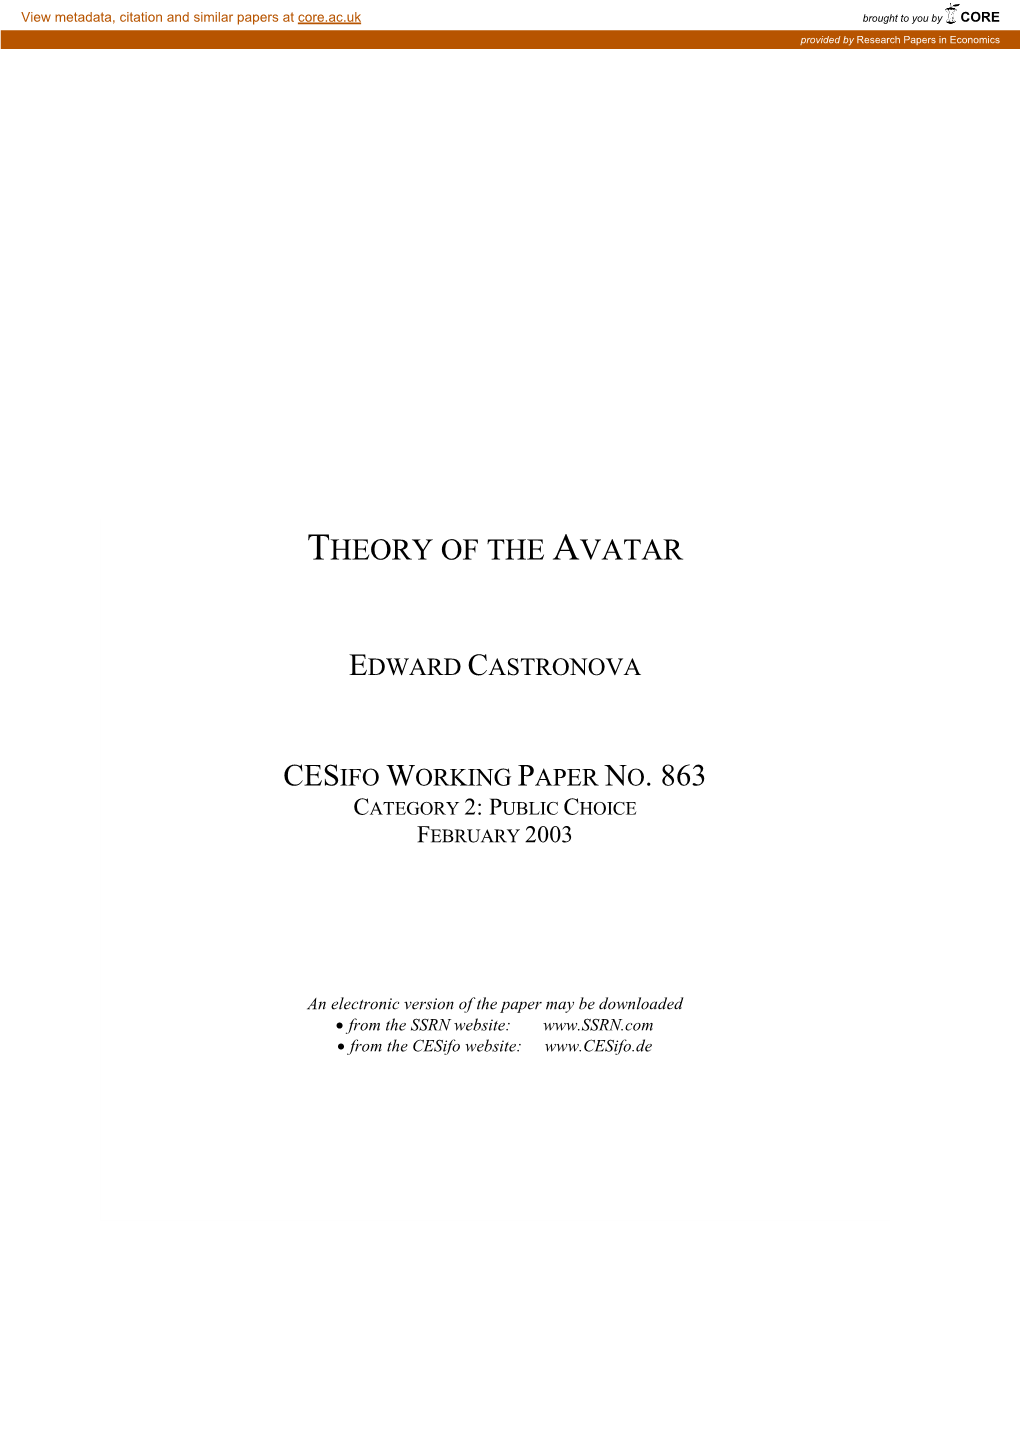 Theory of the Avatar